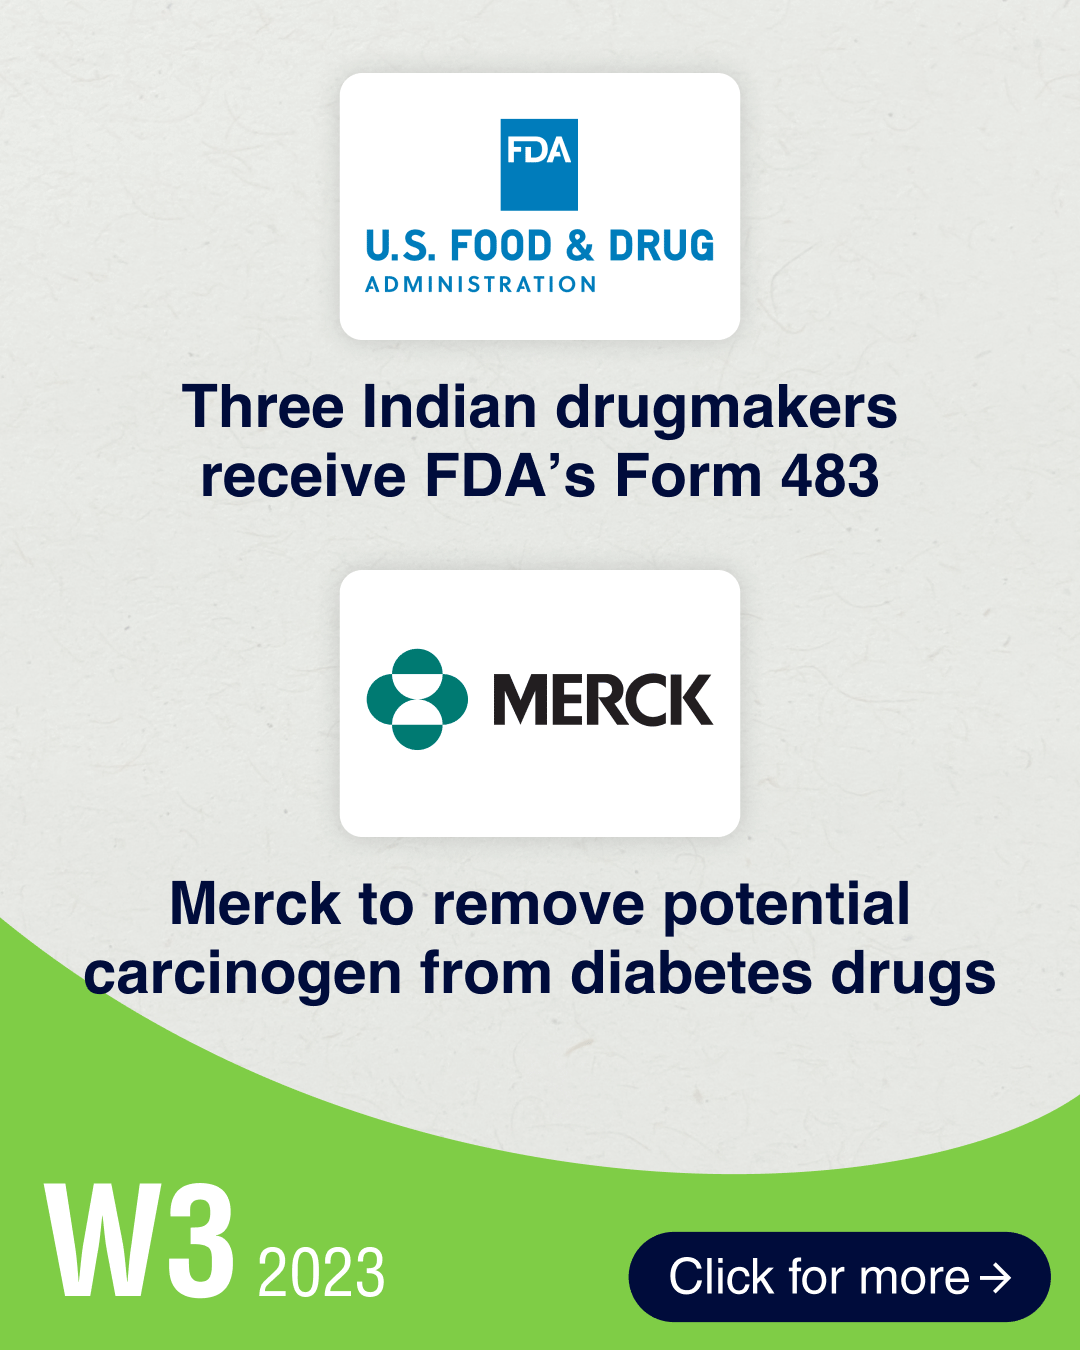 Three Indian drugmakers receive FDA’s Form 483; Merck to remove potential carcinogen from diabetes drugs